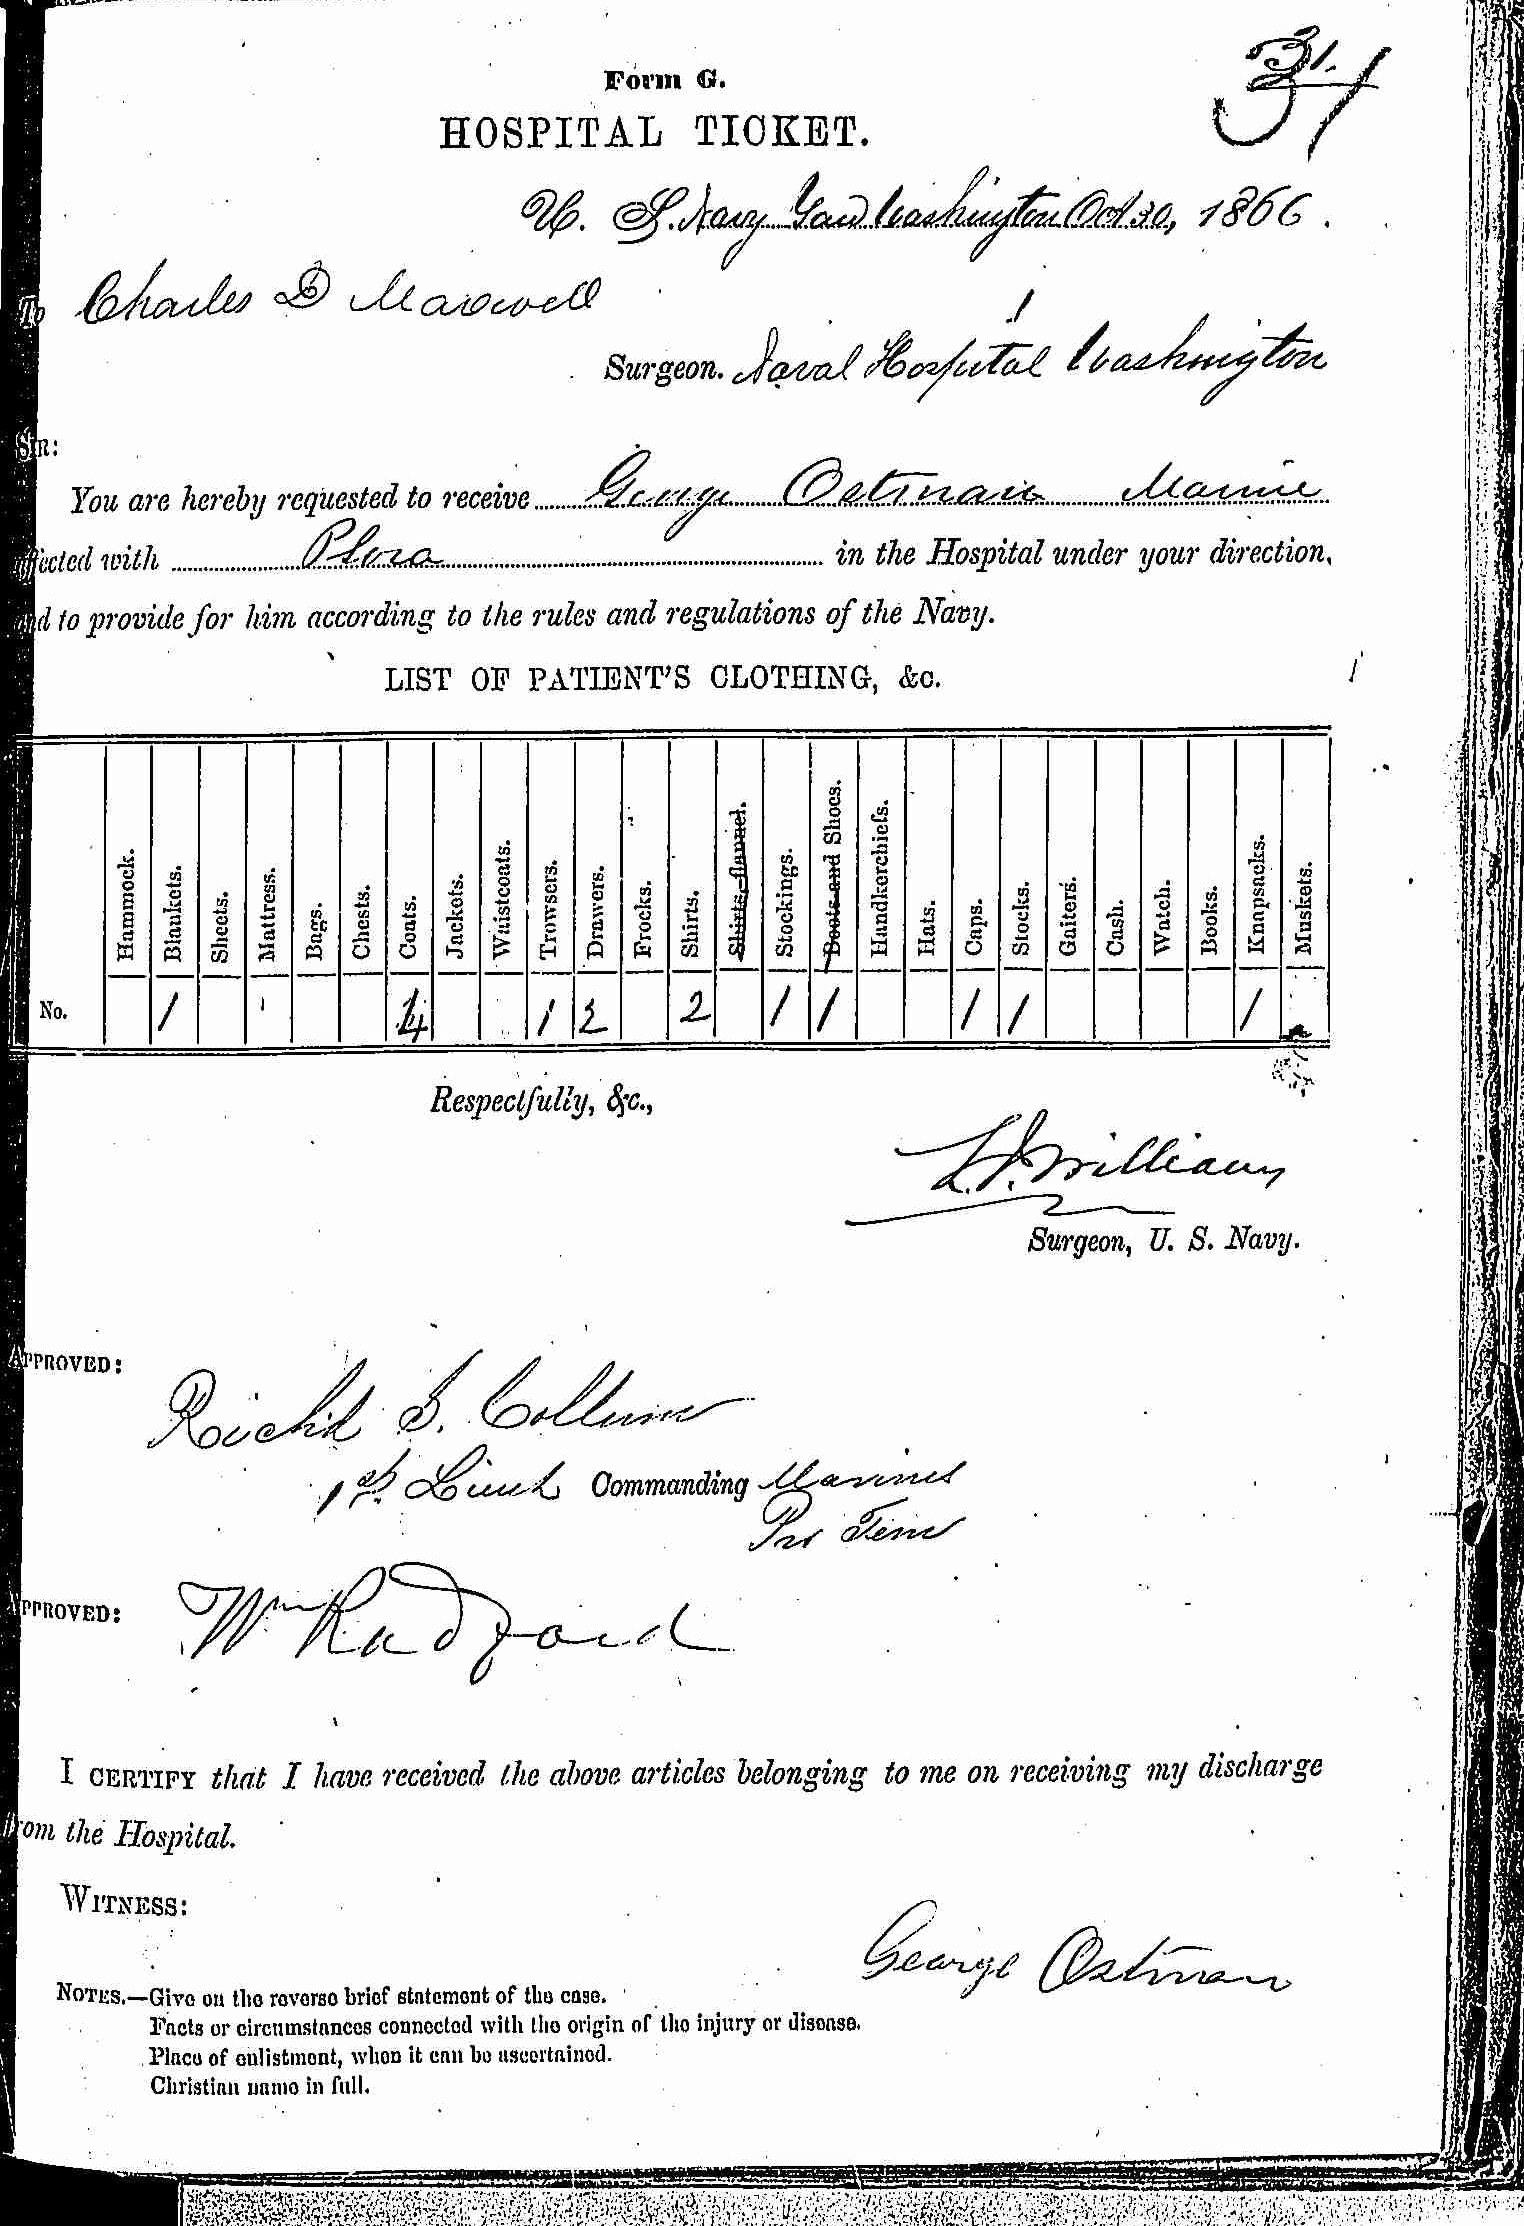 Entry for George Ostman (first admission page 1 of 2) in the log Hospital Tickets and Case Papers - Naval Hospital - Washington, D.C. - 1865-68